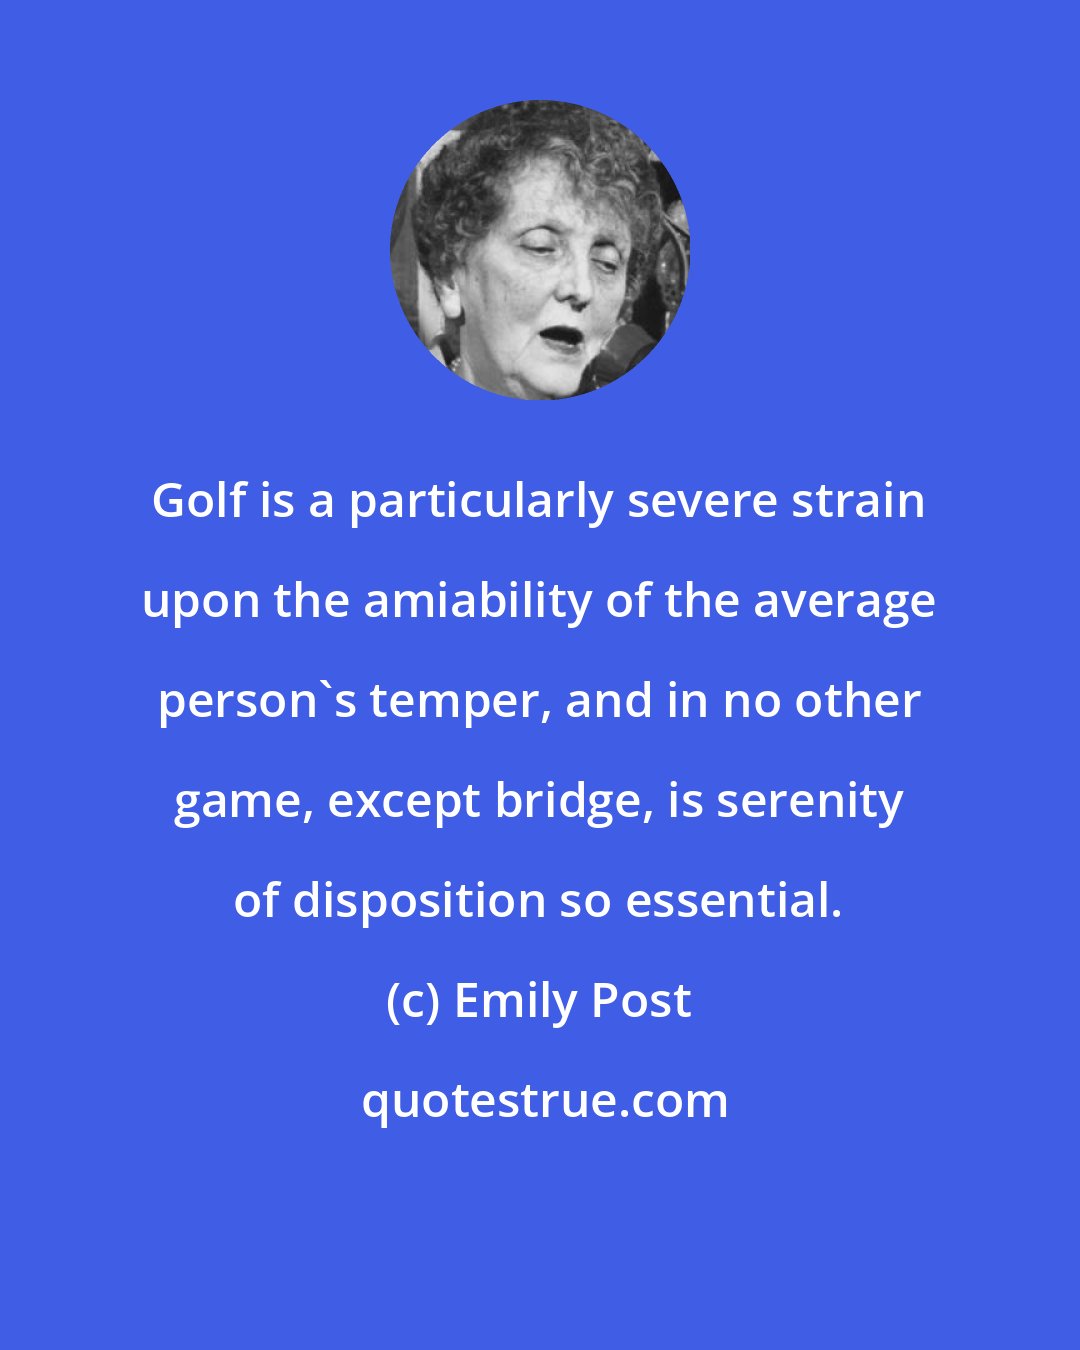 Emily Post: Golf is a particularly severe strain upon the amiability of the average person's temper, and in no other game, except bridge, is serenity of disposition so essential.